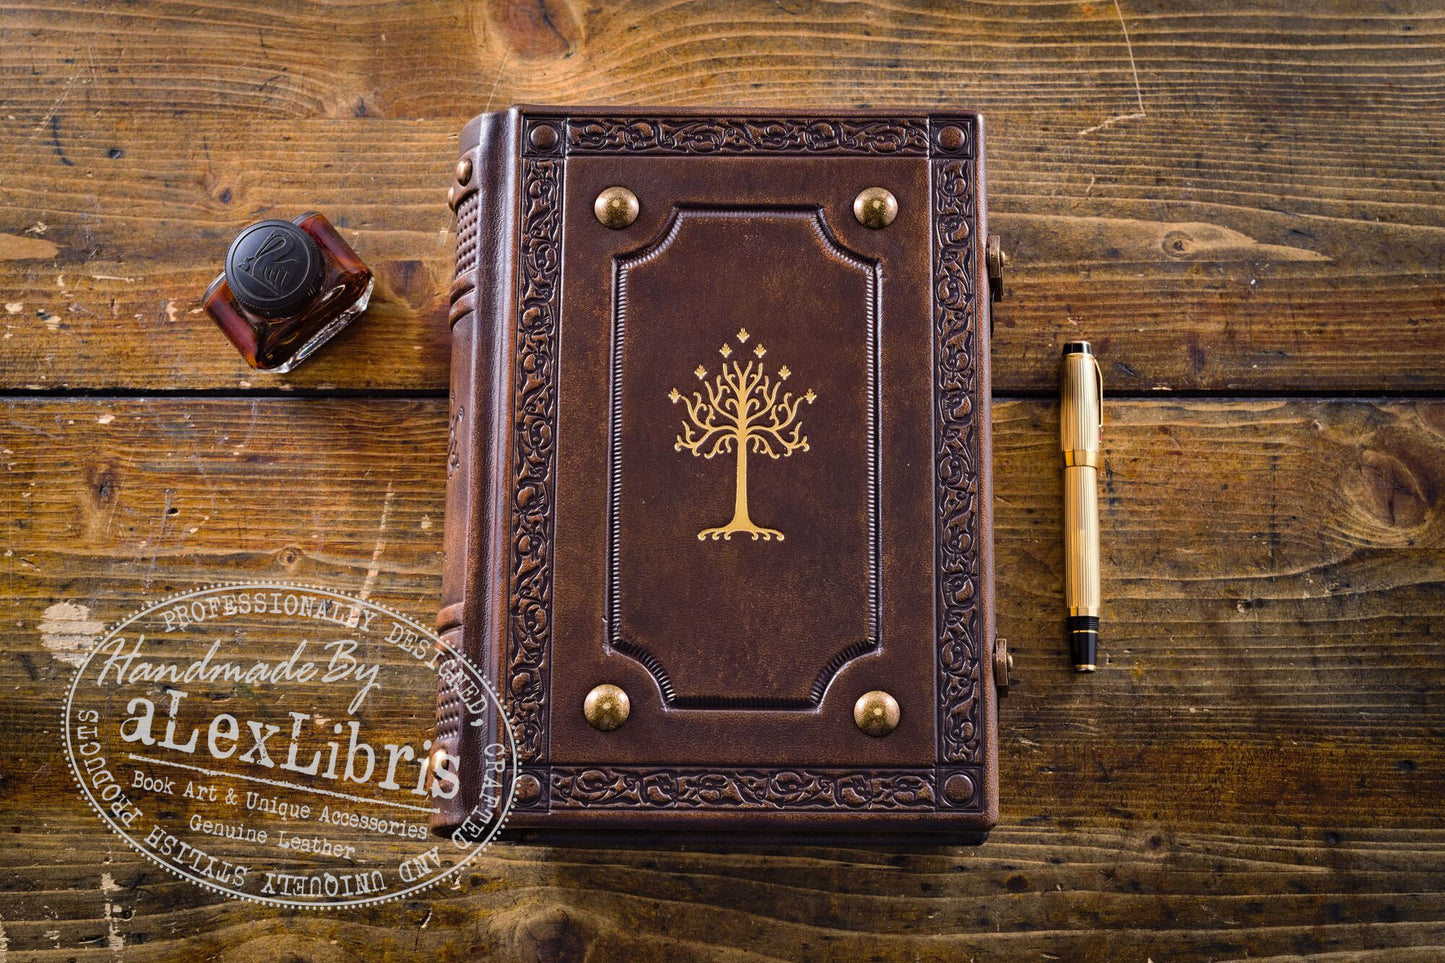 Gondor Tree Leather Journal: Large 7.5 x 10 Inches, 600 Blank Pages - Realm of Gondor with this Antiqued Leather Journal